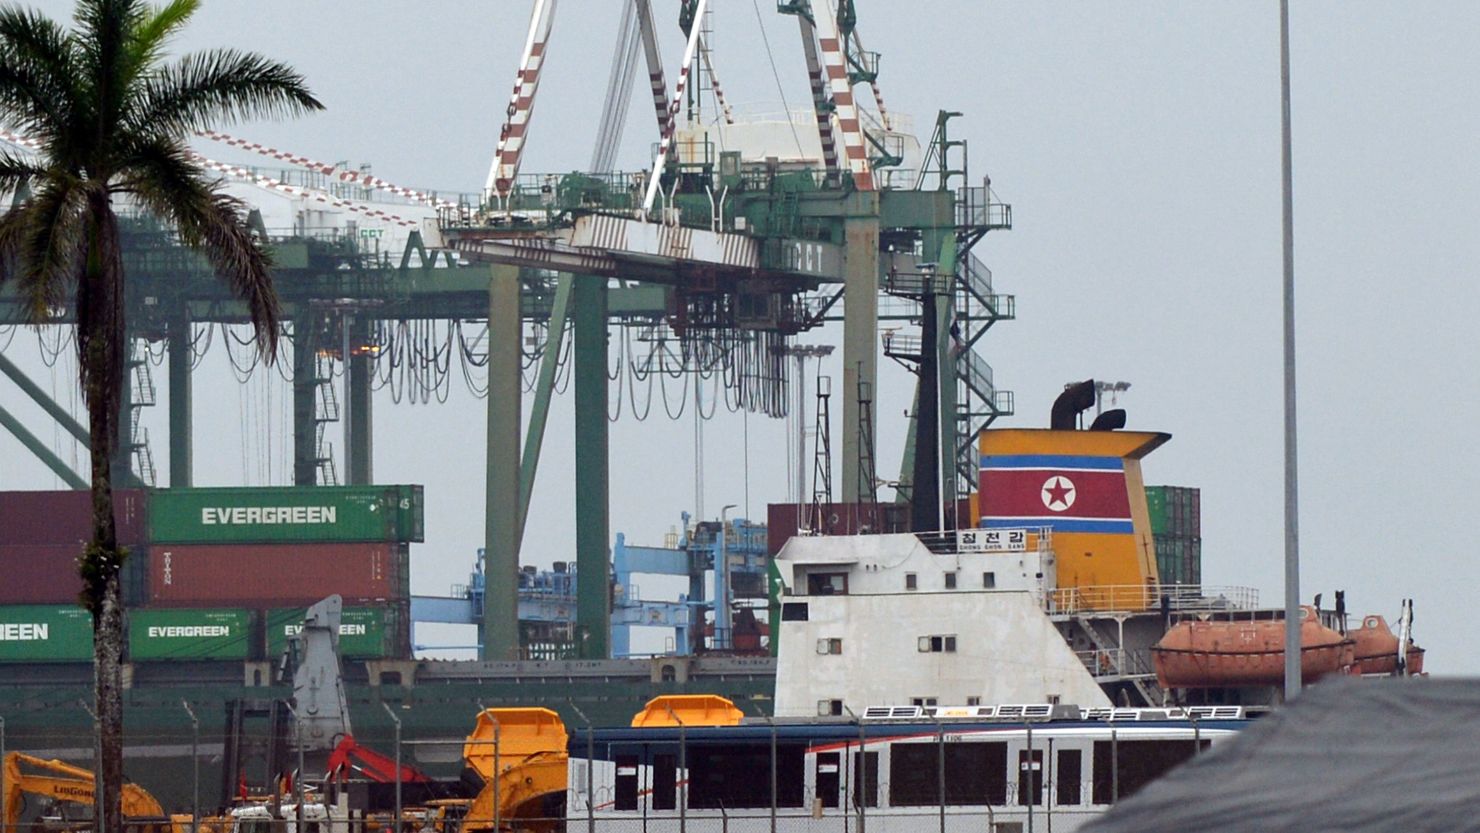 Panamanian inspectors are examining containers on a North Korean ship after weapons were found, officials say.